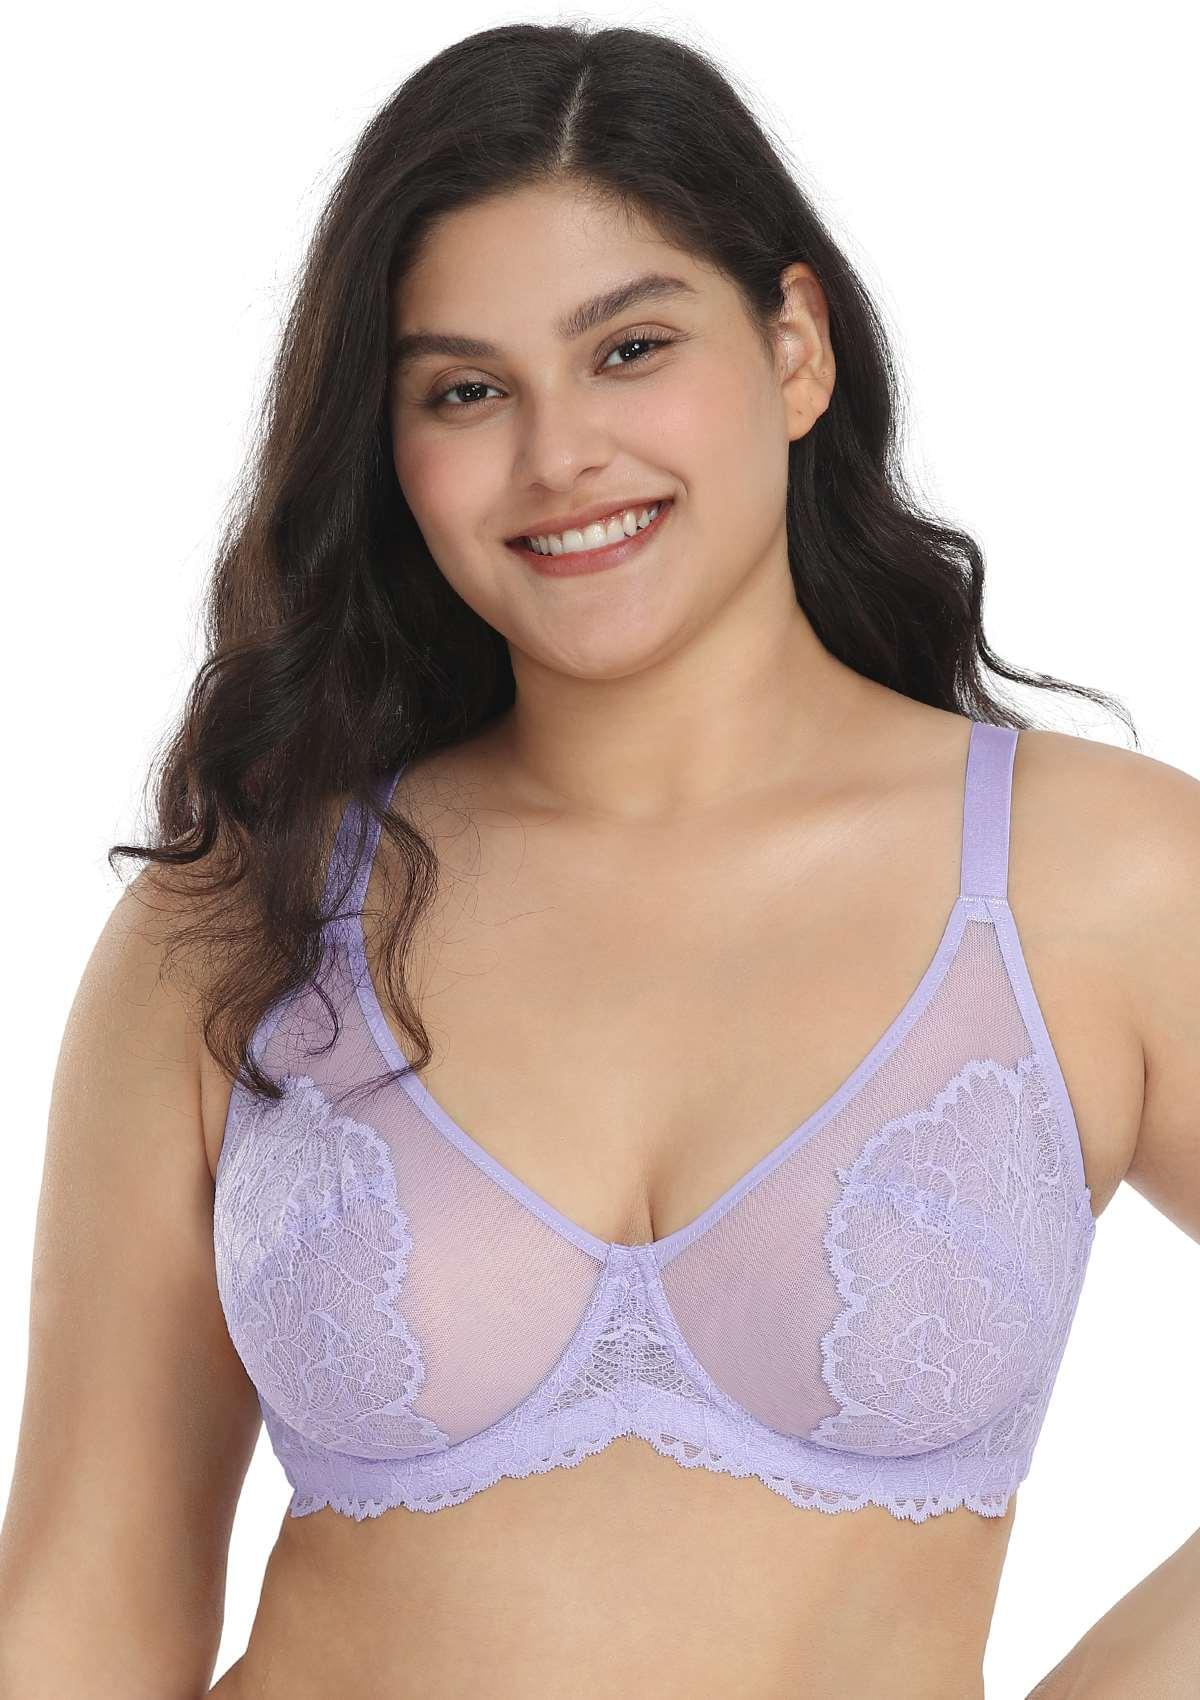 HSIA Blossom Transparent Lace Bra: Plus Size Wired Back Smoothing Bra - Light Purple / 36 / G